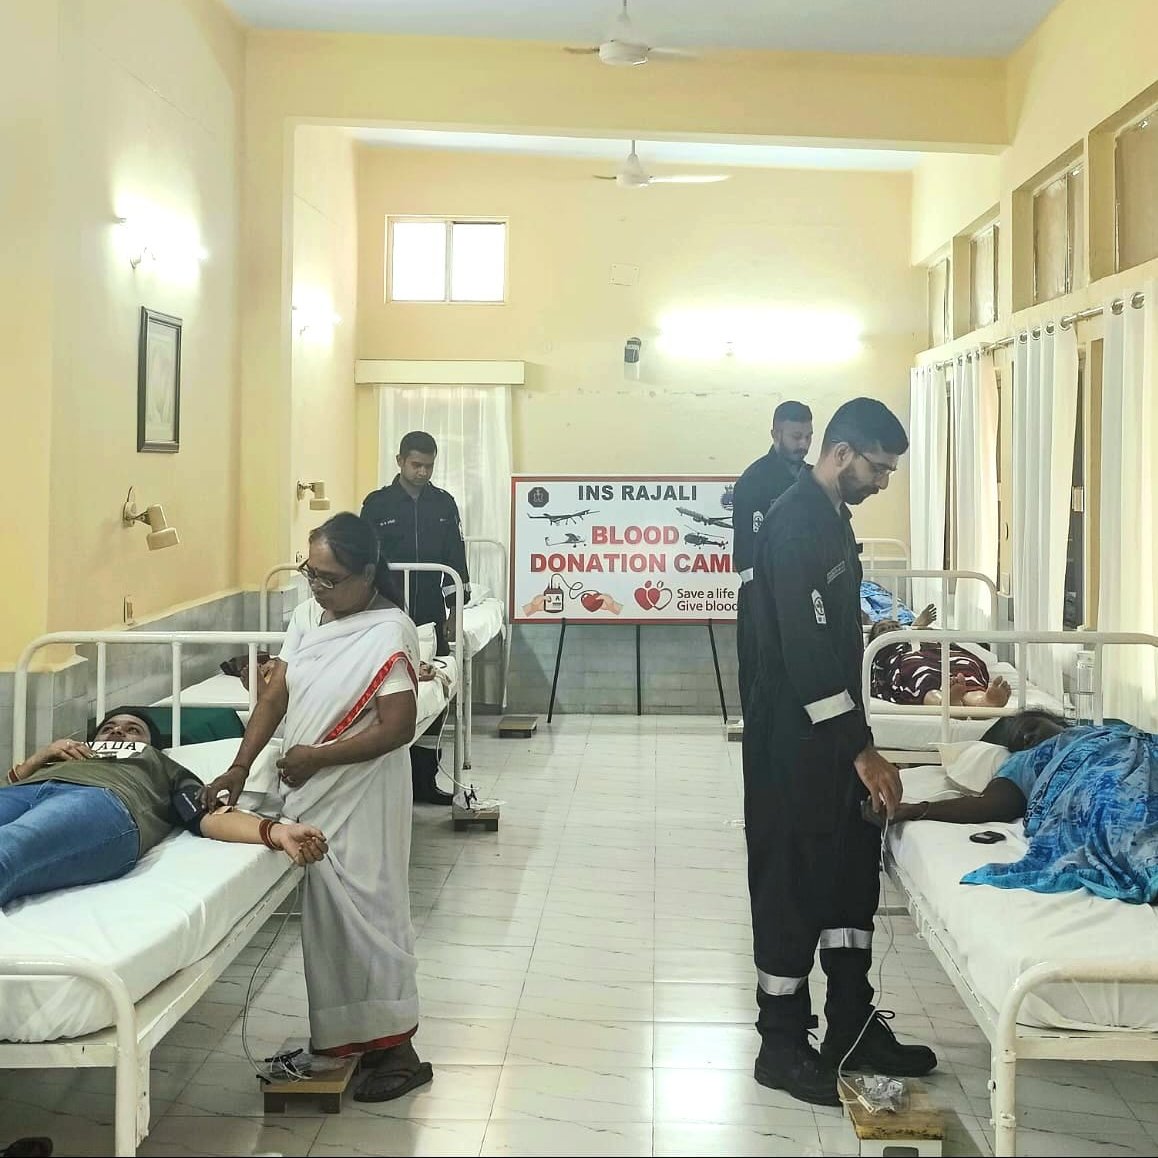 ⚓️Kudos to INS Rajali for organising a #BloodDonation camp in association with Saveetha Hospital, #Chennai. #NavyWeek
🩸 Cmde Kapil Mehta CO INS Rajali  inaugurated the camp, contributing 111 units to Saveetha Hospital's Blood Bank. 
✨Incredible teamwork for #SavingLives